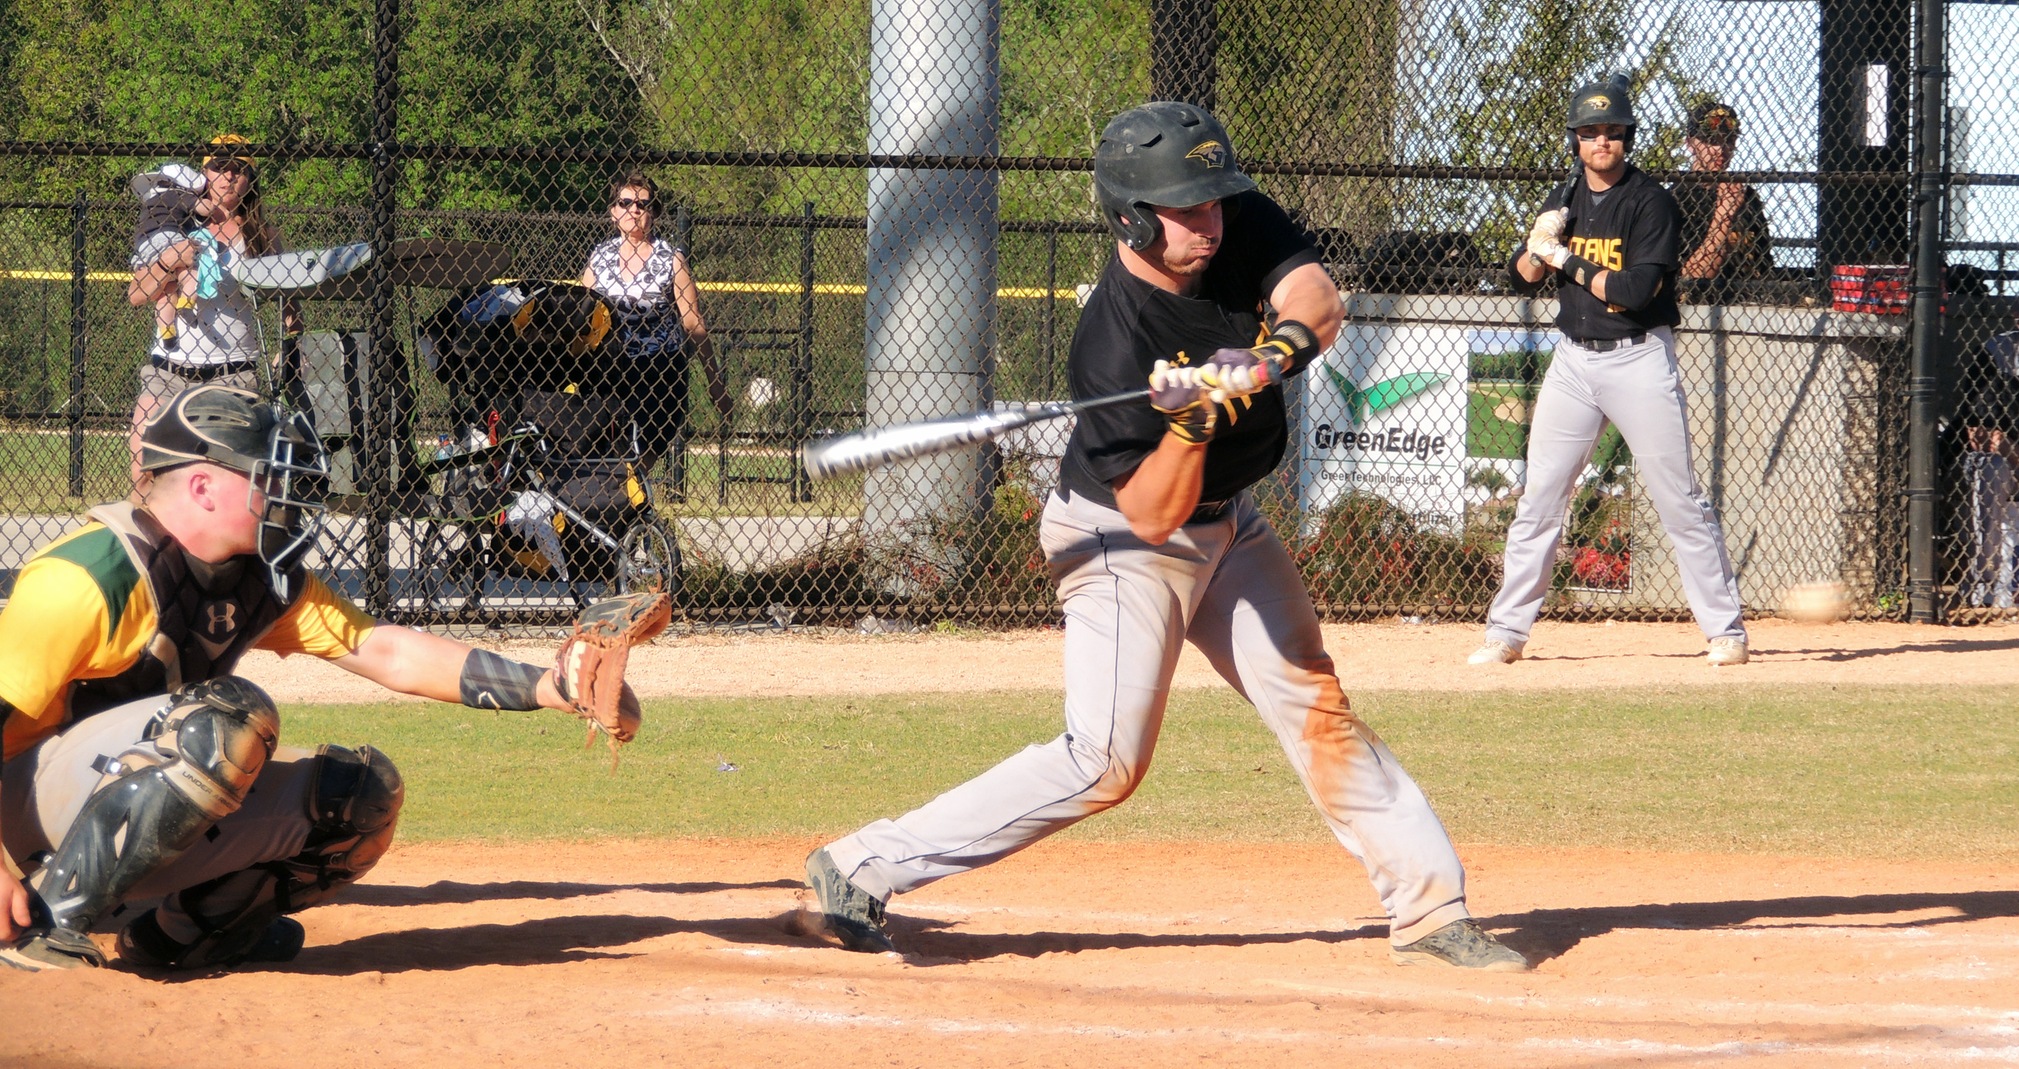 Logan Reckert drove in four runs and had four of UW-Oshkosh's 15 hits against the Golden Knights.